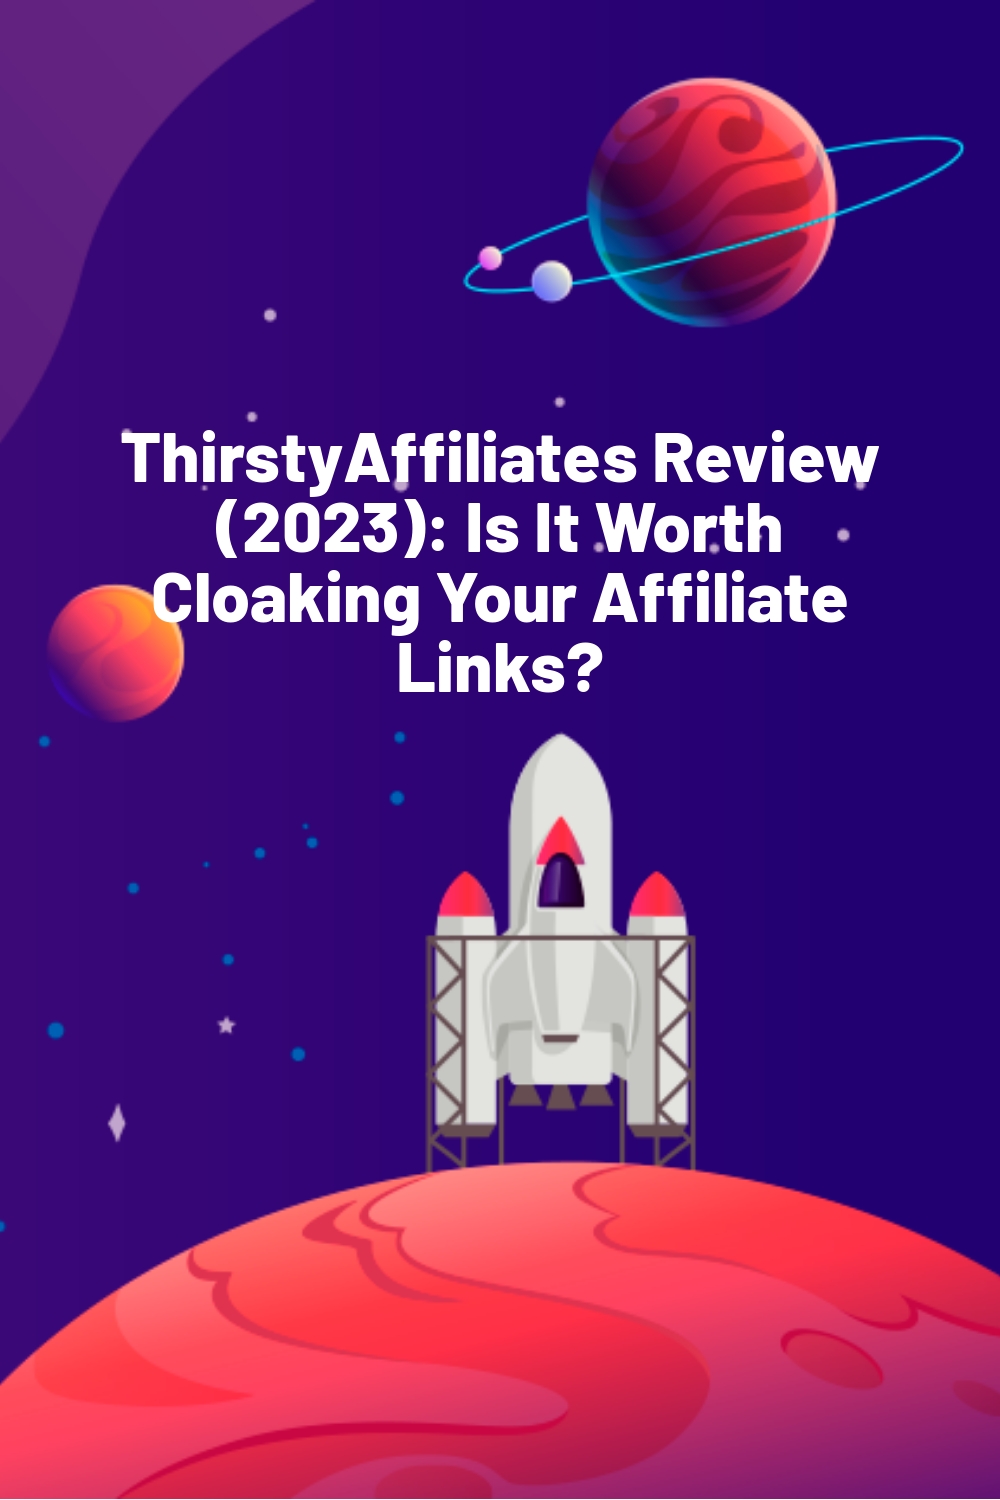 ThirstyAffiliates Review (2023): Is It Worth Cloaking Your Affiliate Links?